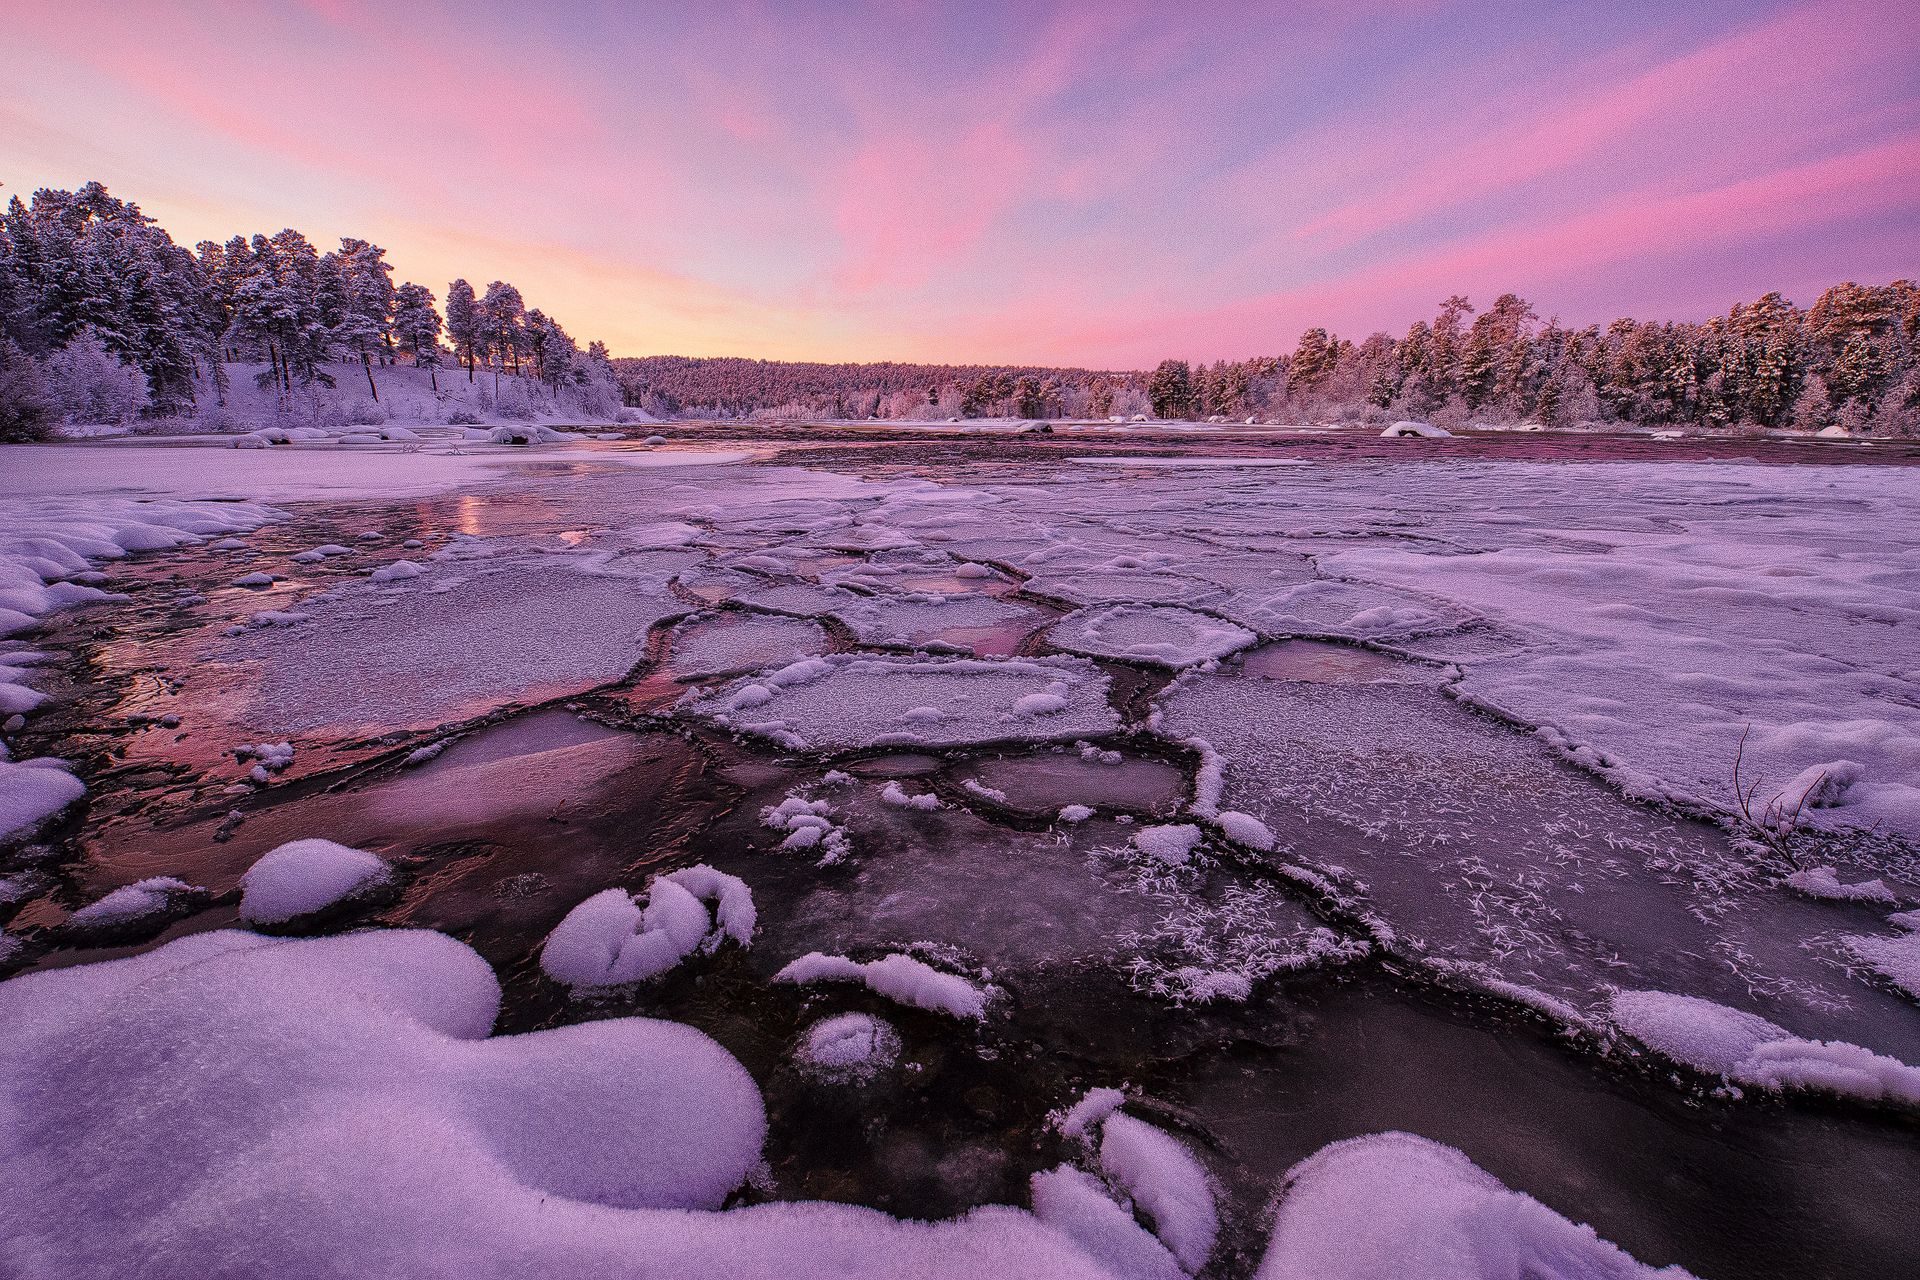 ice river, finland, lapland, finnish lapland, colorful sky, snow, trees, sunset, landscape, winter